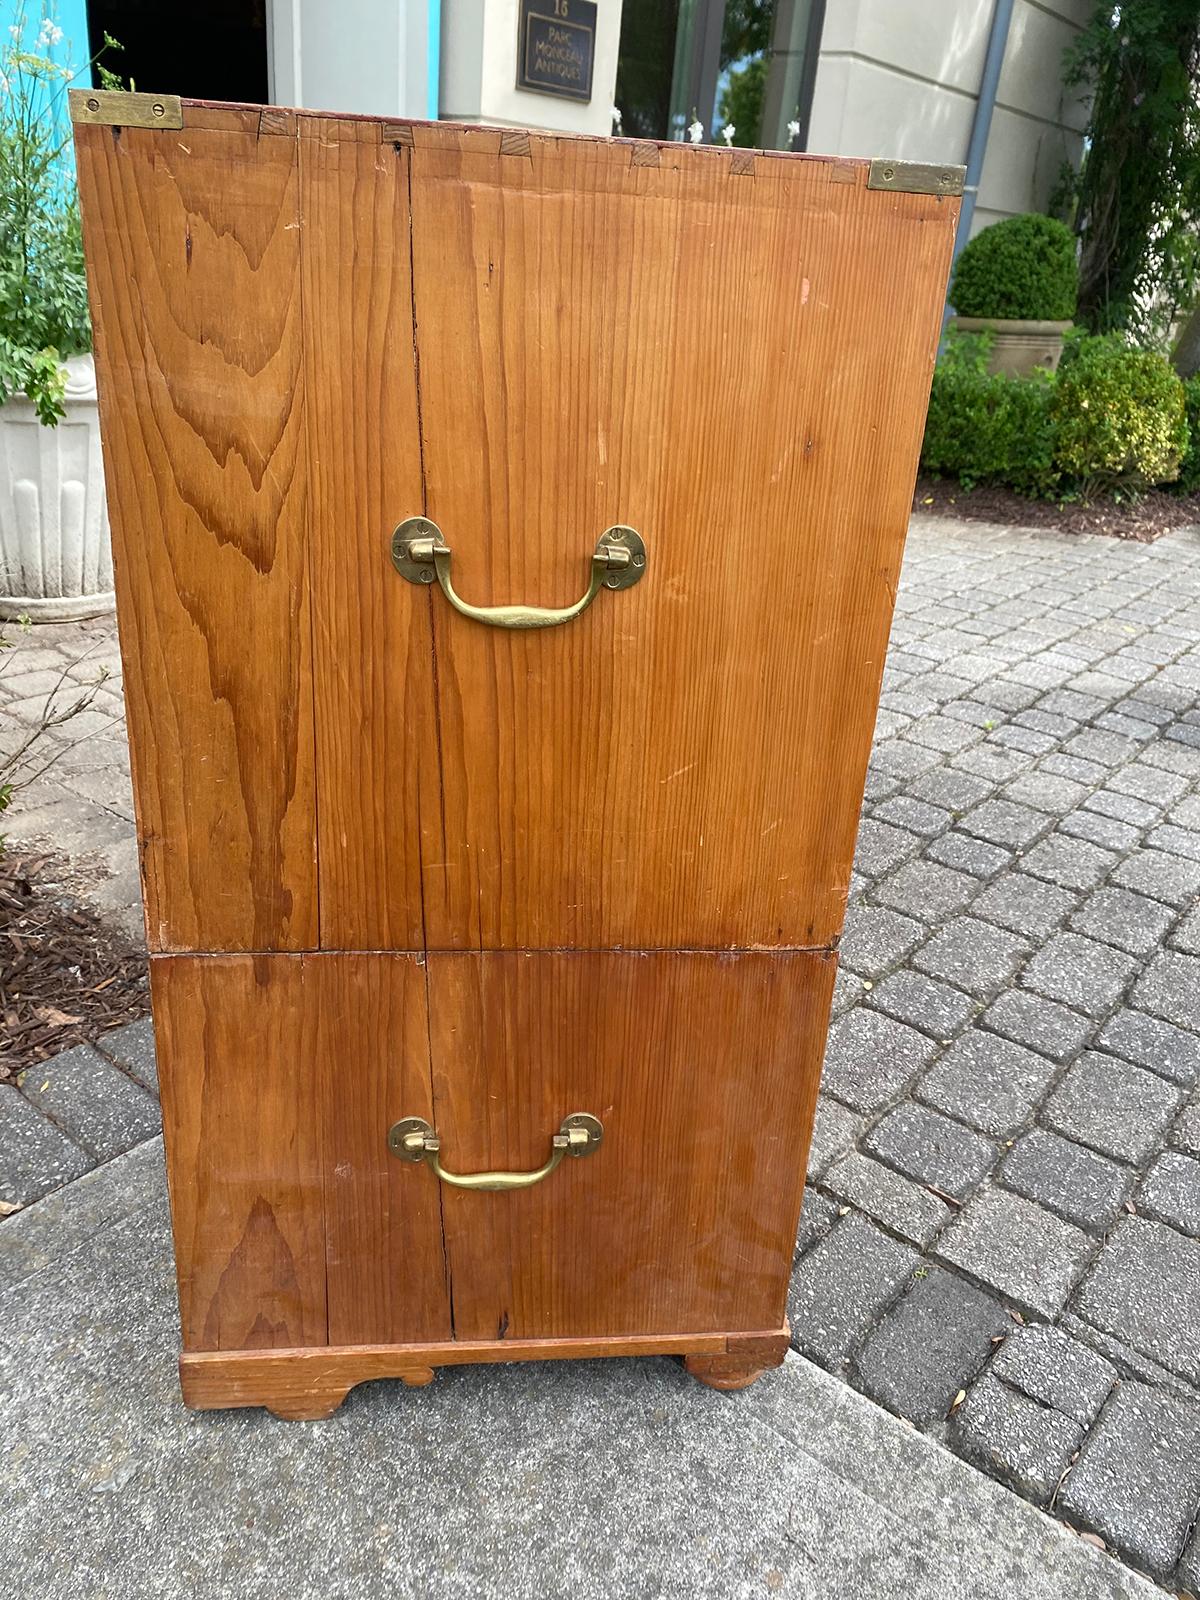 Circa 1880s-1890s English Pine Campaign Chest of Drawers For Sale 1